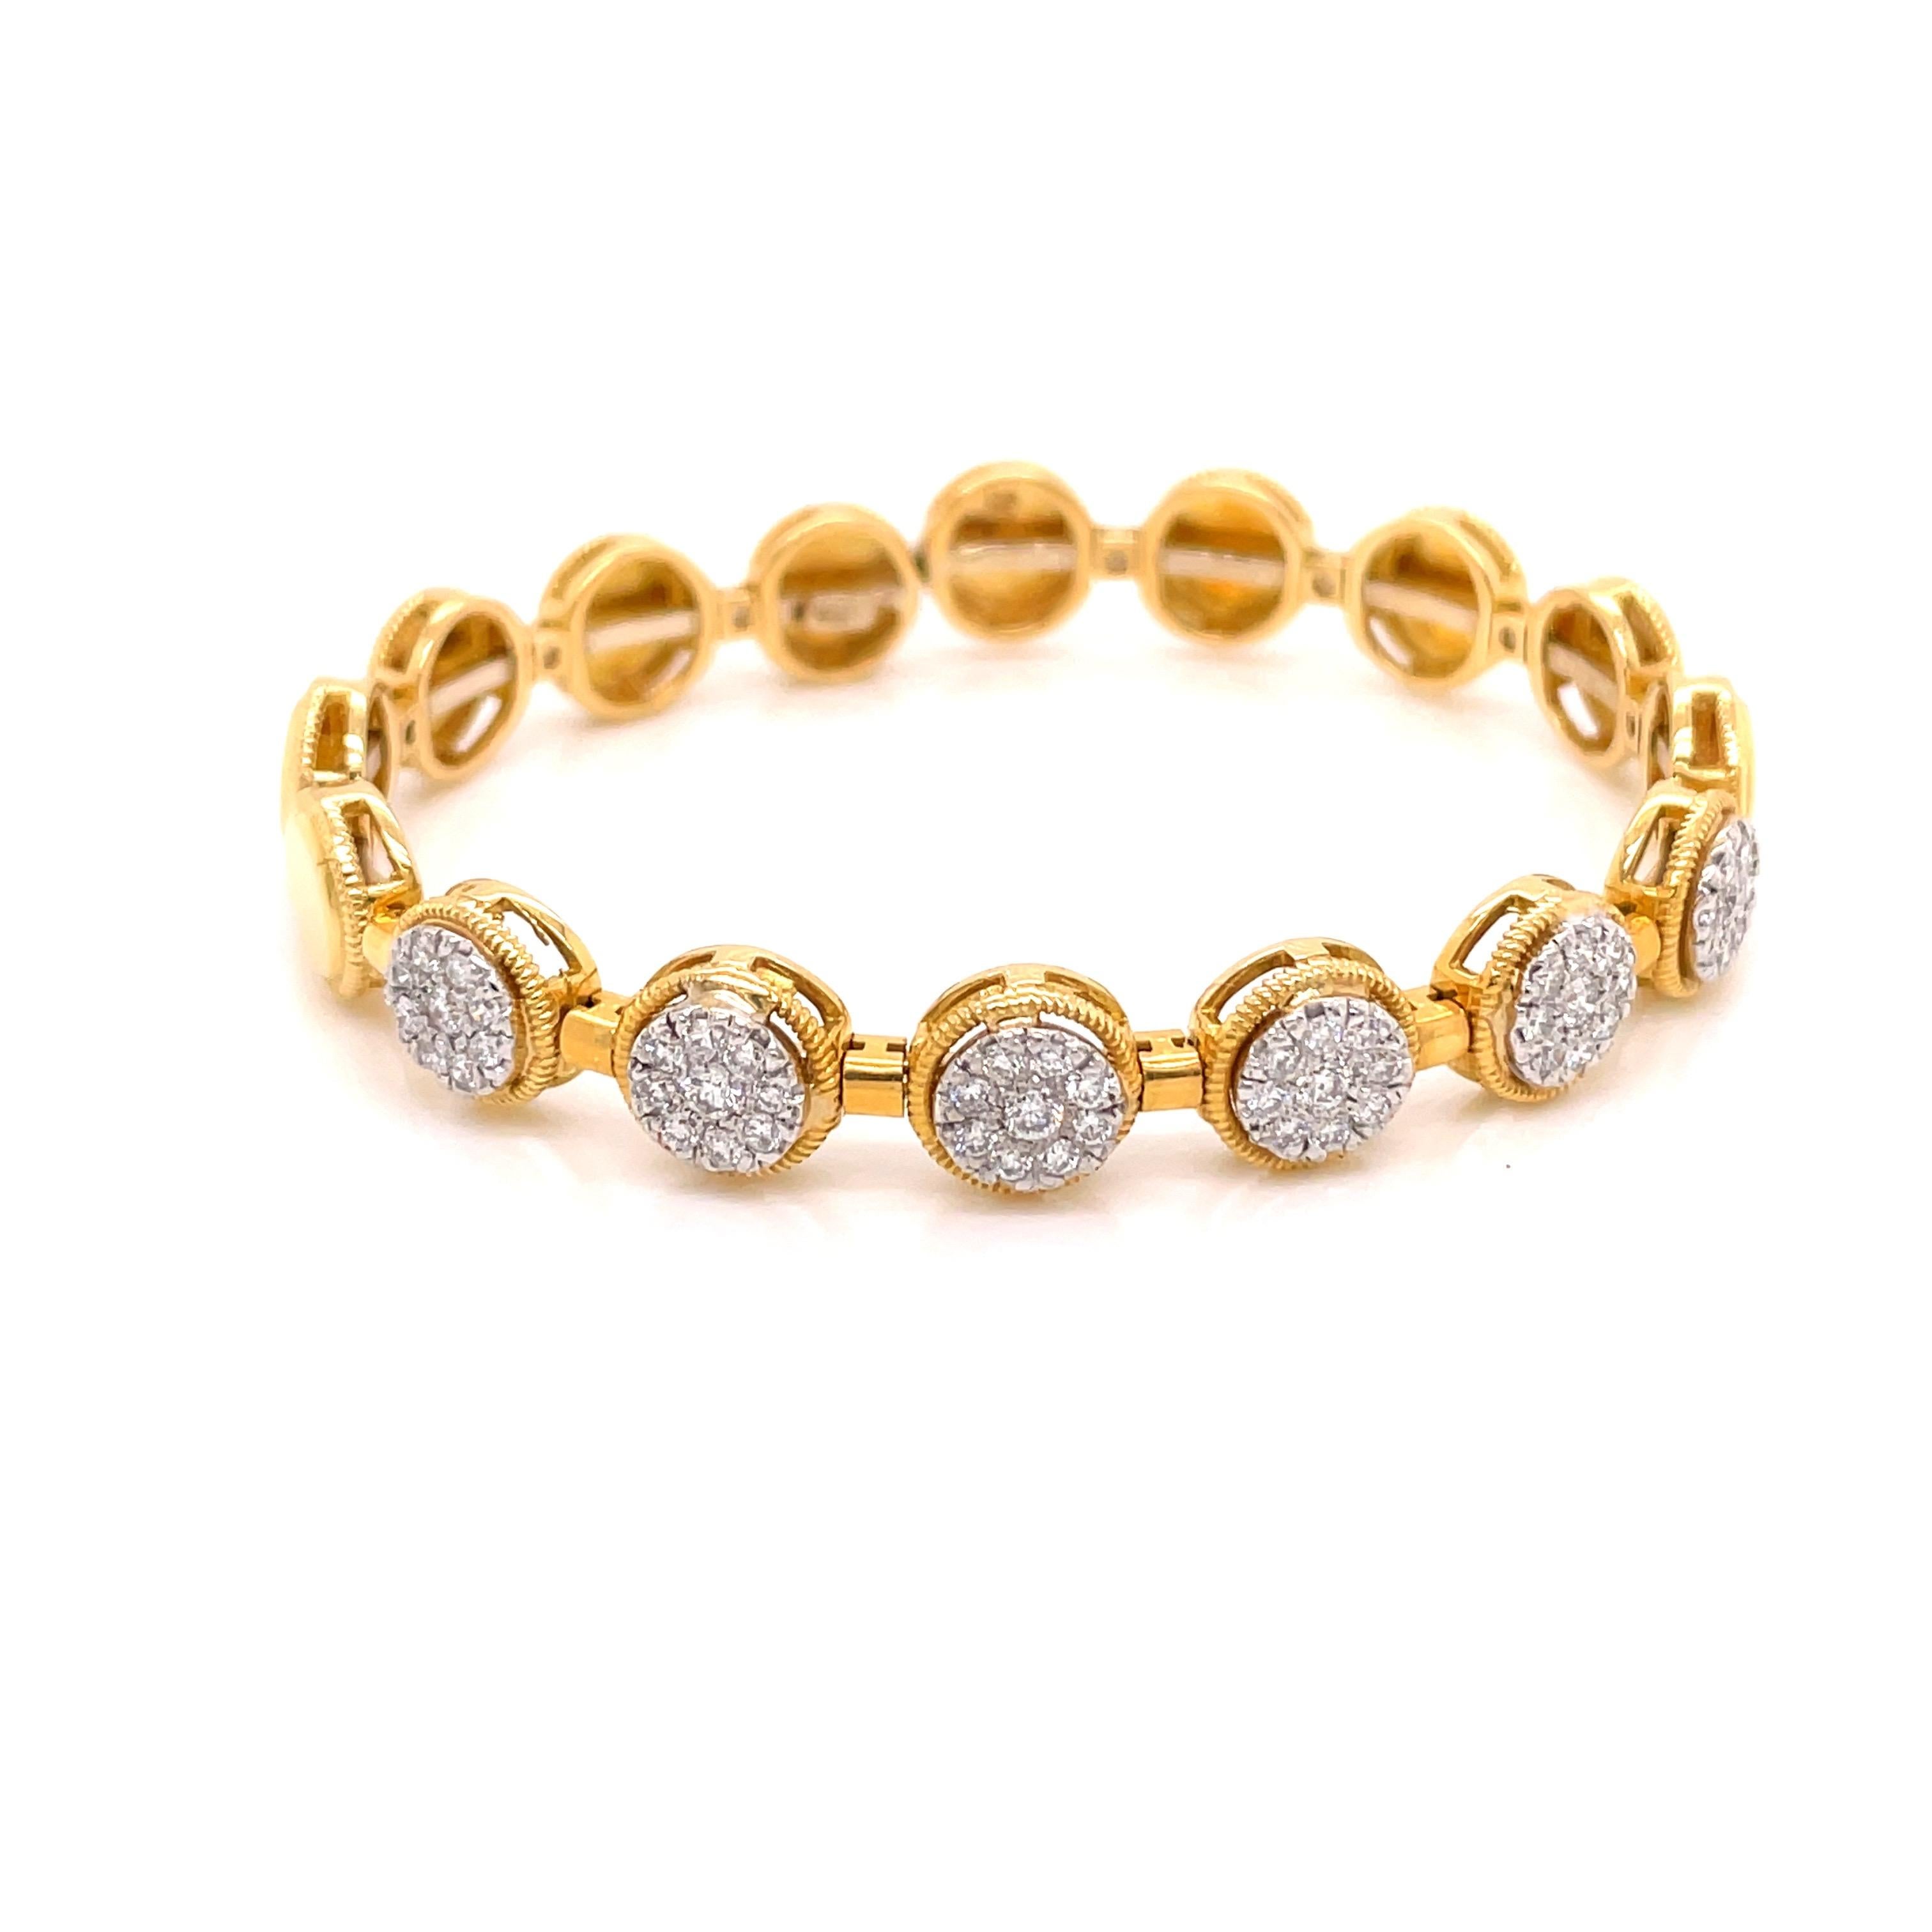 18K Yellow Gold Diamond Cuff Bracelet 1.00ct - The bangle has 6 sections of pave round brilliant diamonds - total of 54 diamonds weighing 1.00ct with F - G color and VS2 - SI1 clarity. The diamonds are set in white gold for a brighter sparkle. The